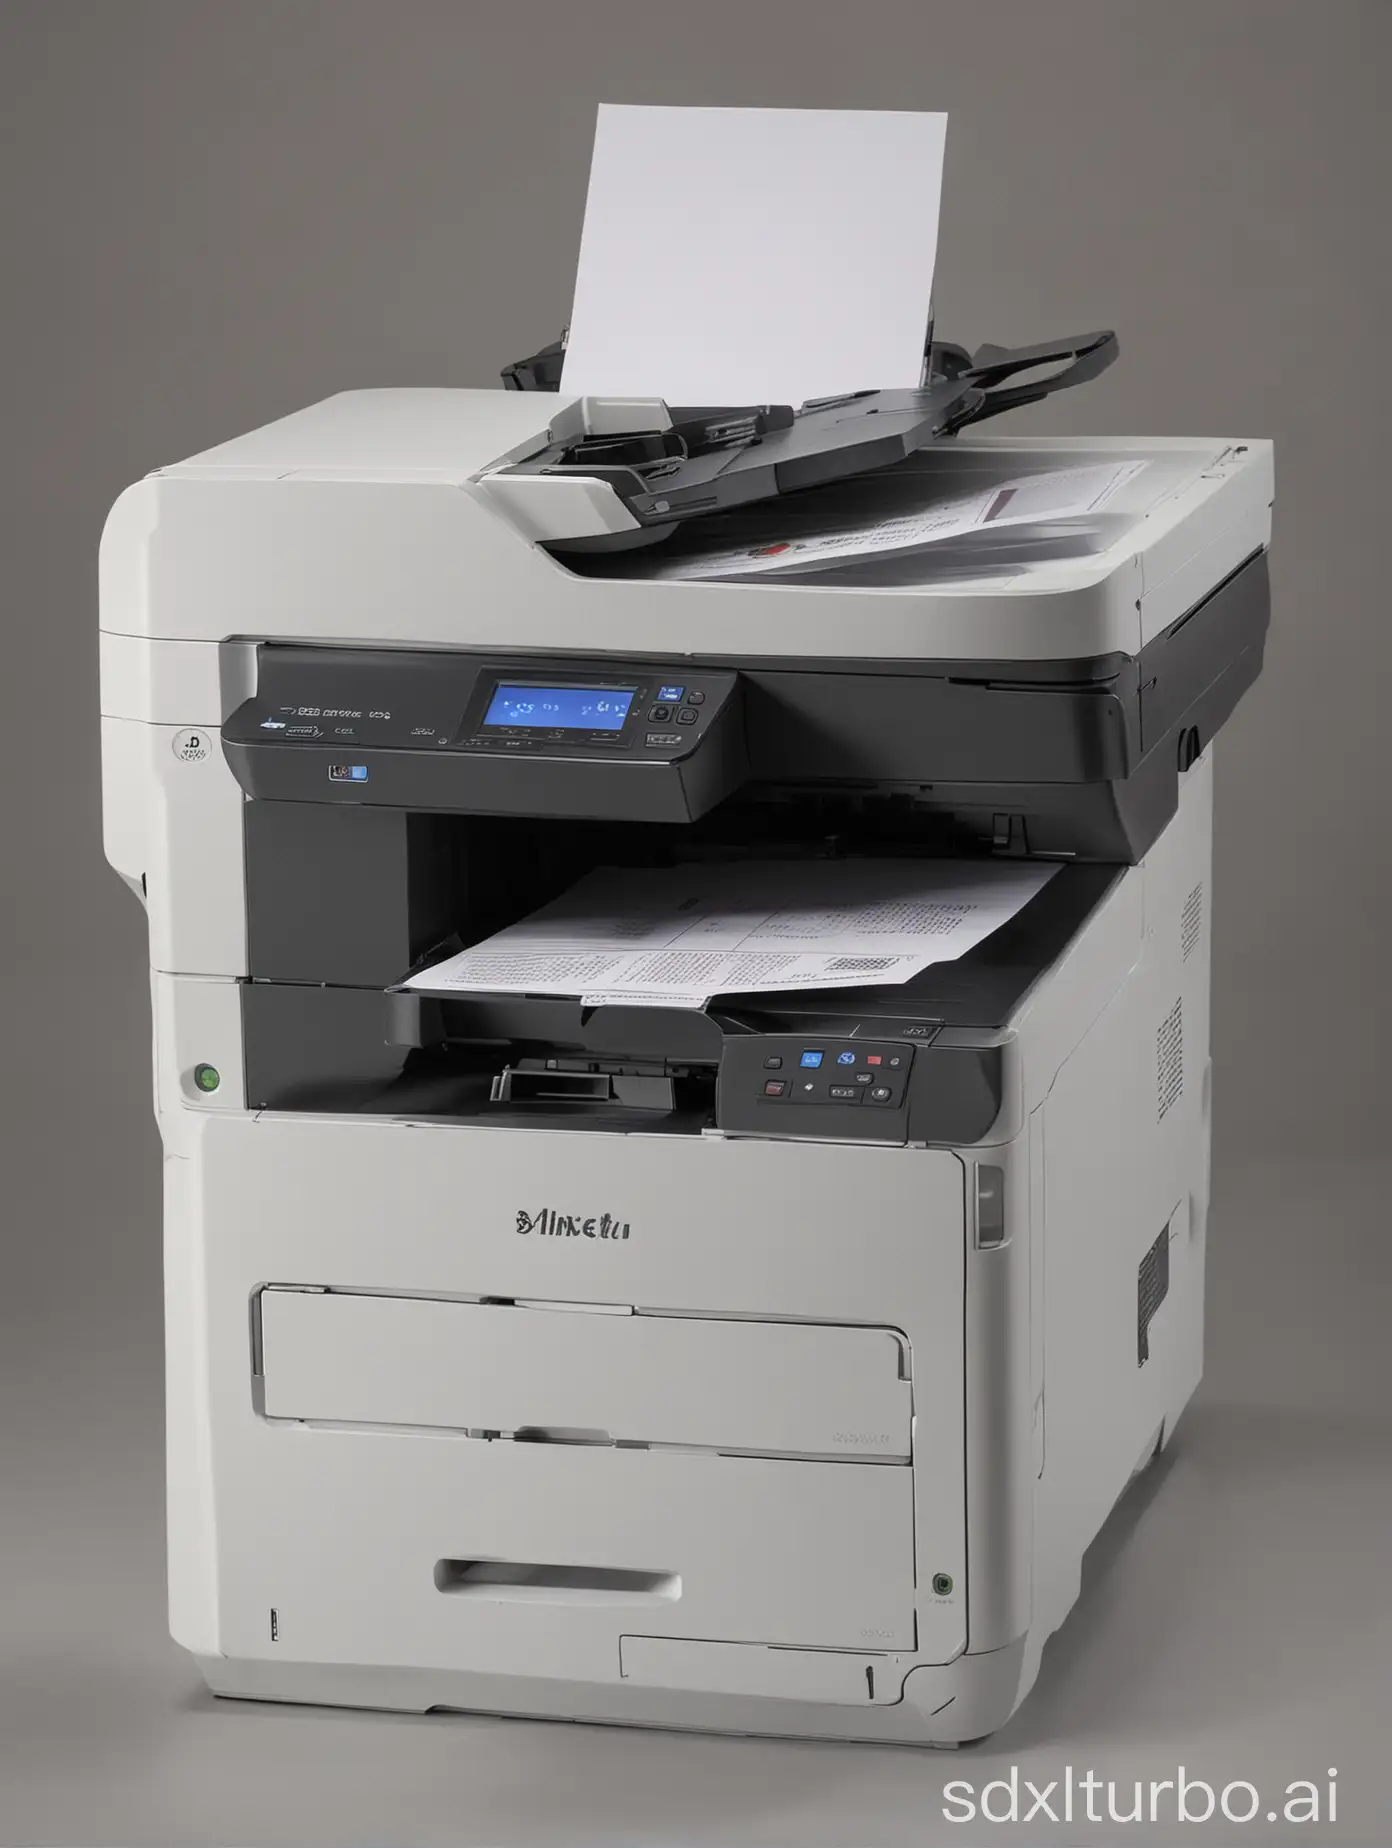 Professional-Printer-Working-in-Office-Environment